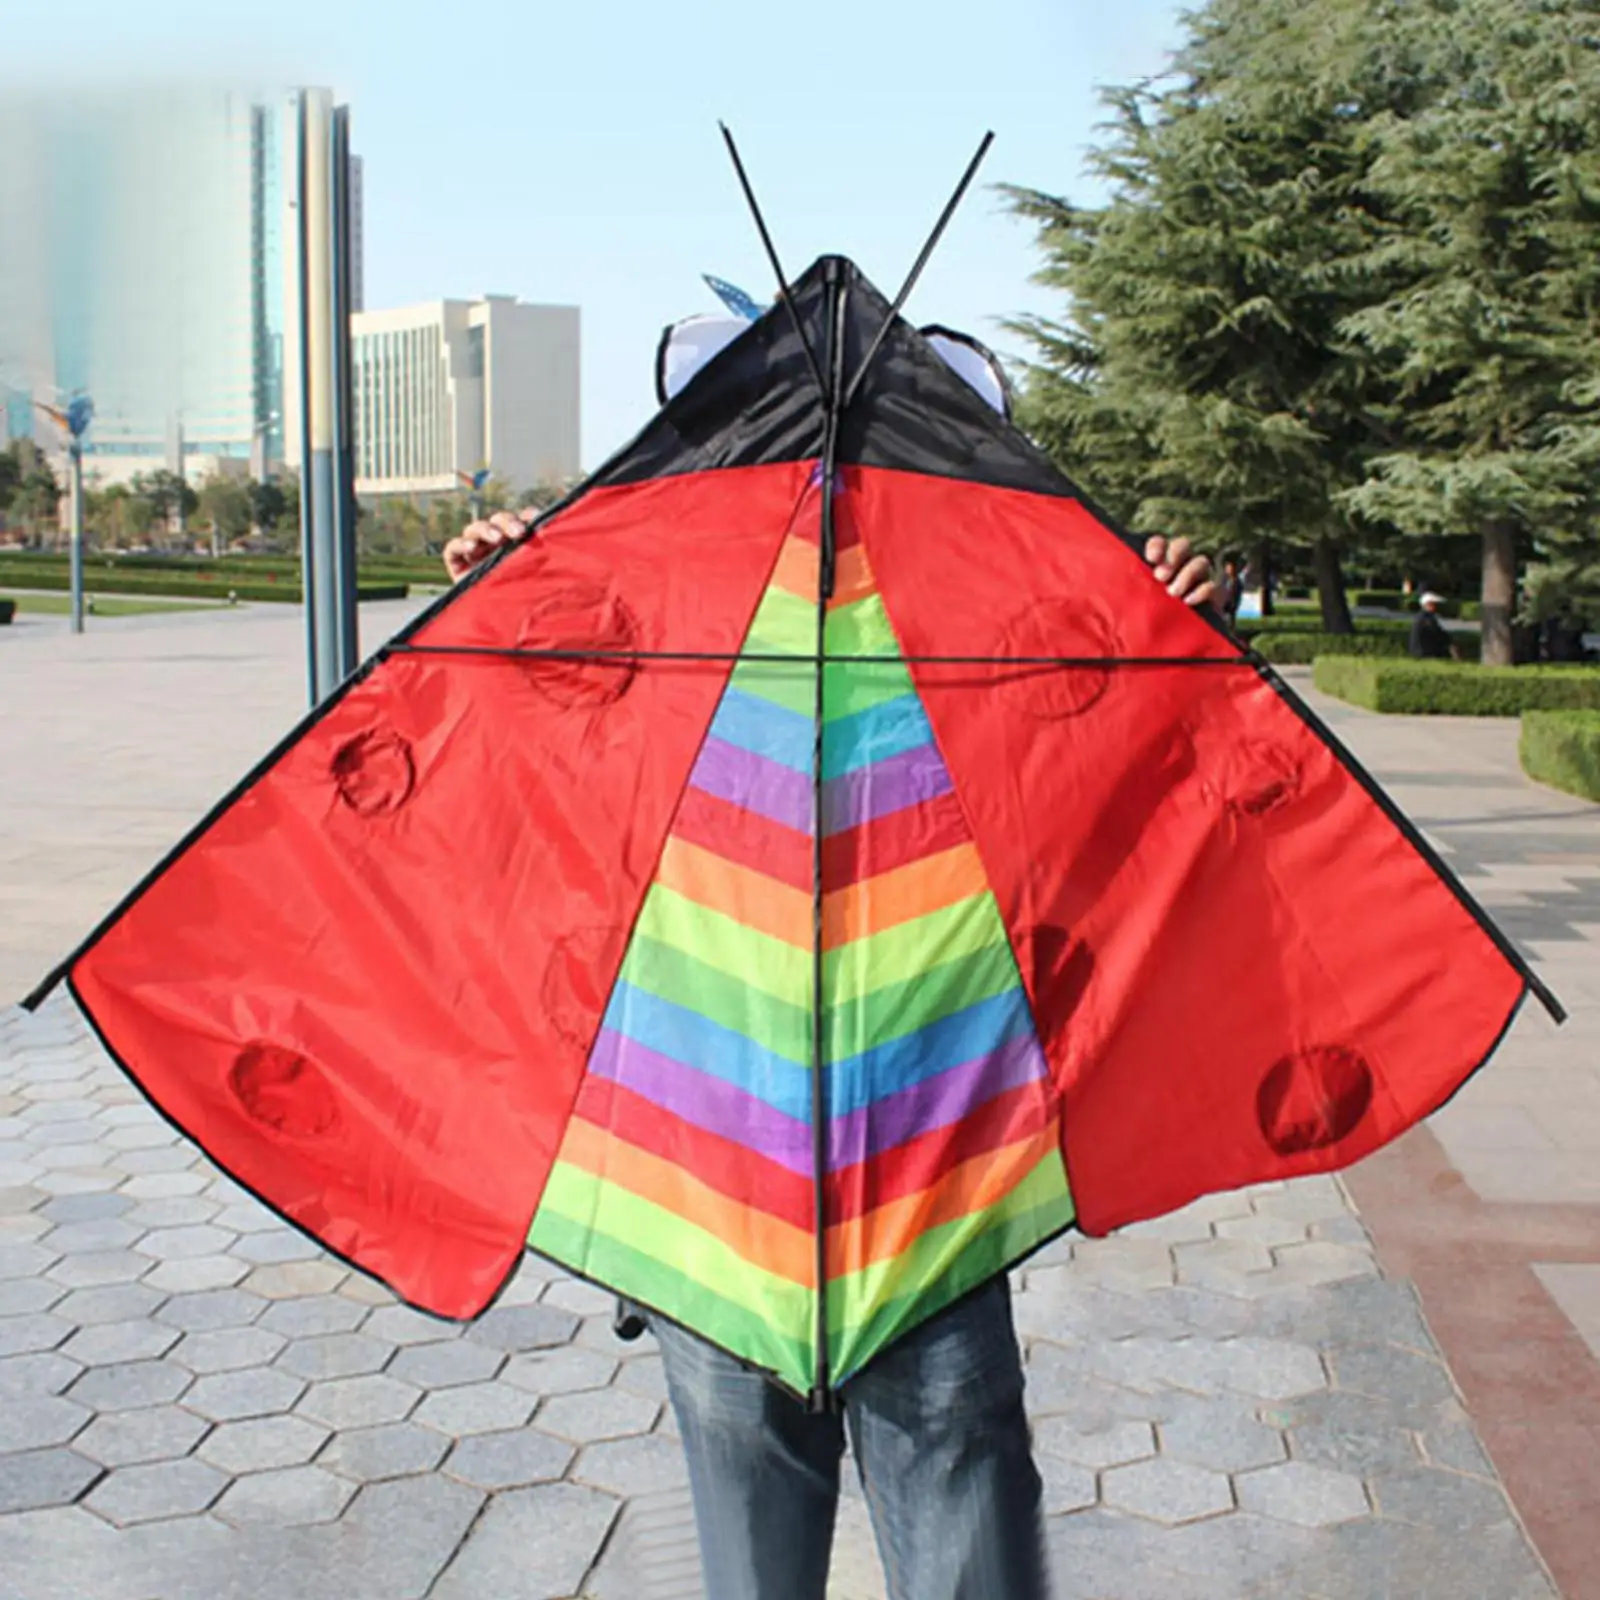 Foldable Triangle Ladybug Kite Fly Kite Easy to Fly Huge Wingspan Fun Toy Single Line Large Delta Kite for Park Beach Garden